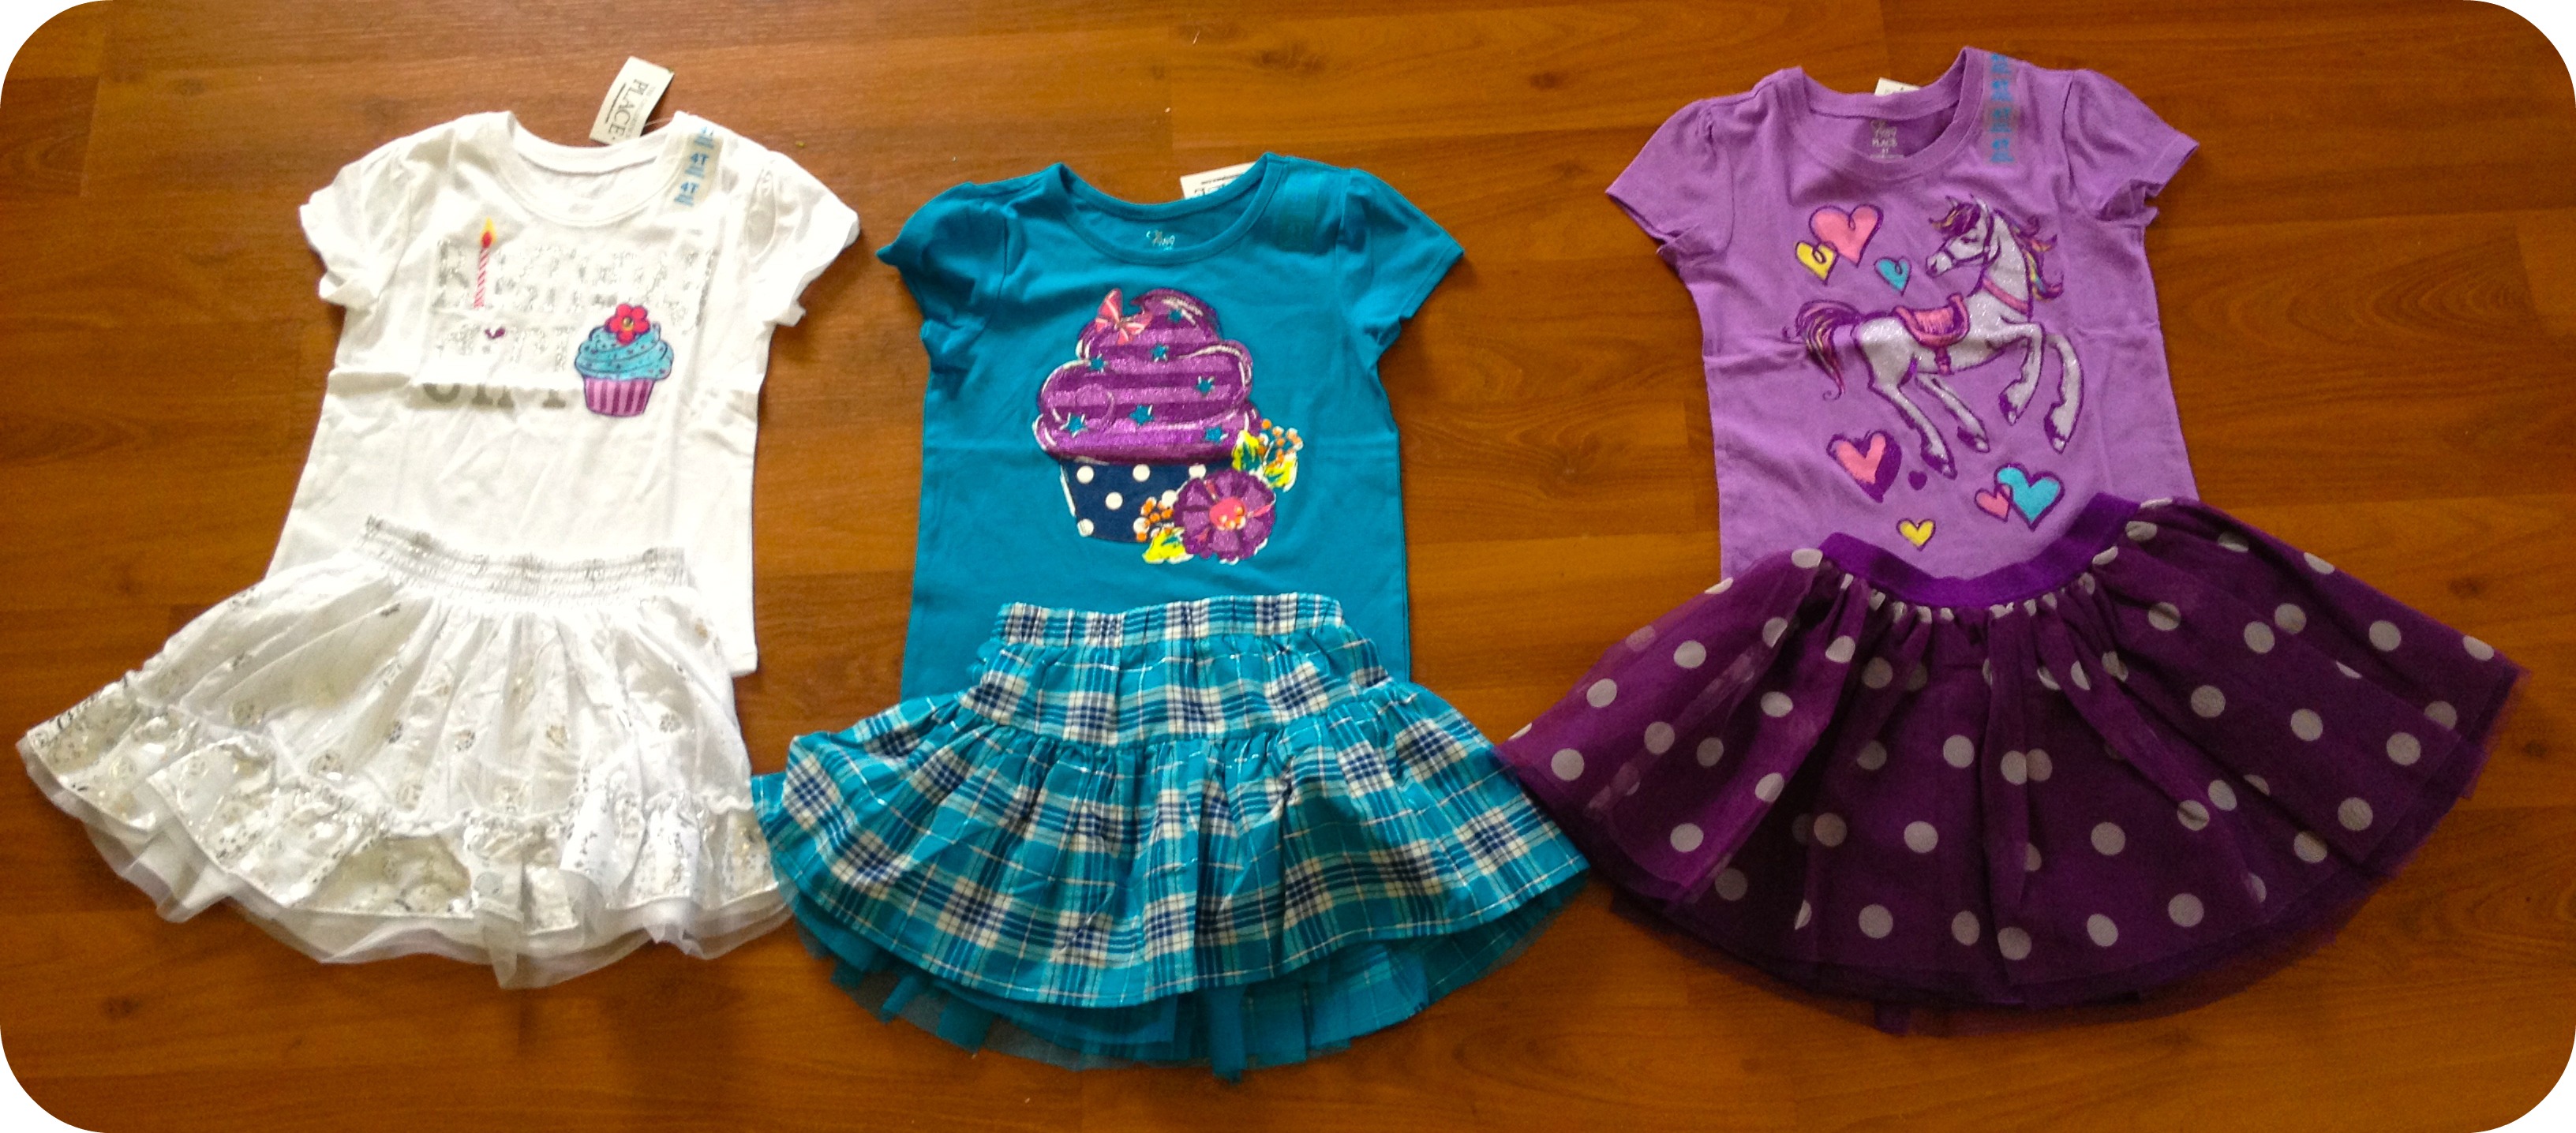 Childrens Place Girls Outfits Our Potluck Family within Children's Place Clothing For Girls